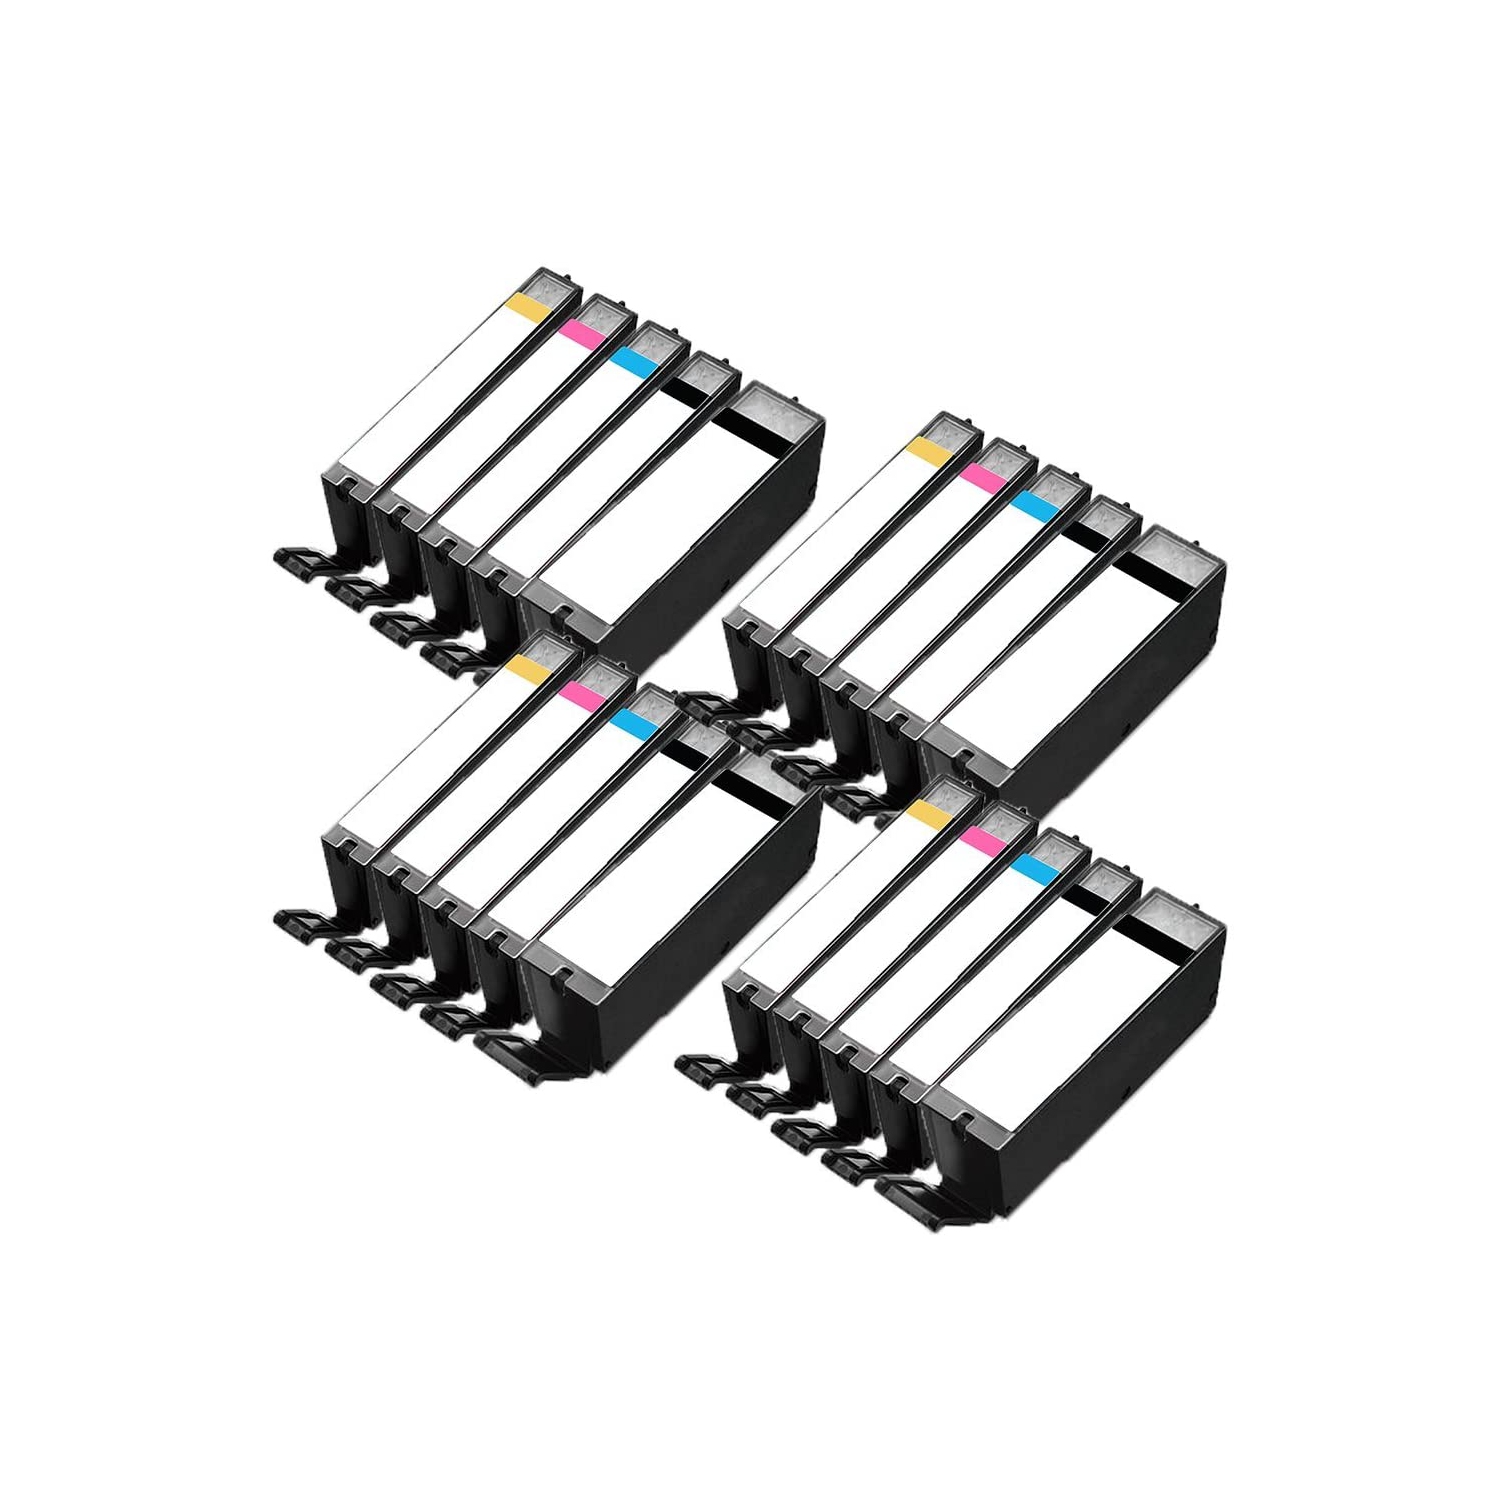 4 Set of 5 Inkfirst Compatible PGI-250XL CLI-251XL PGI-250 CLI-251 Ink Cartridges Replacement for Canon PIXMA MX922 MG5420